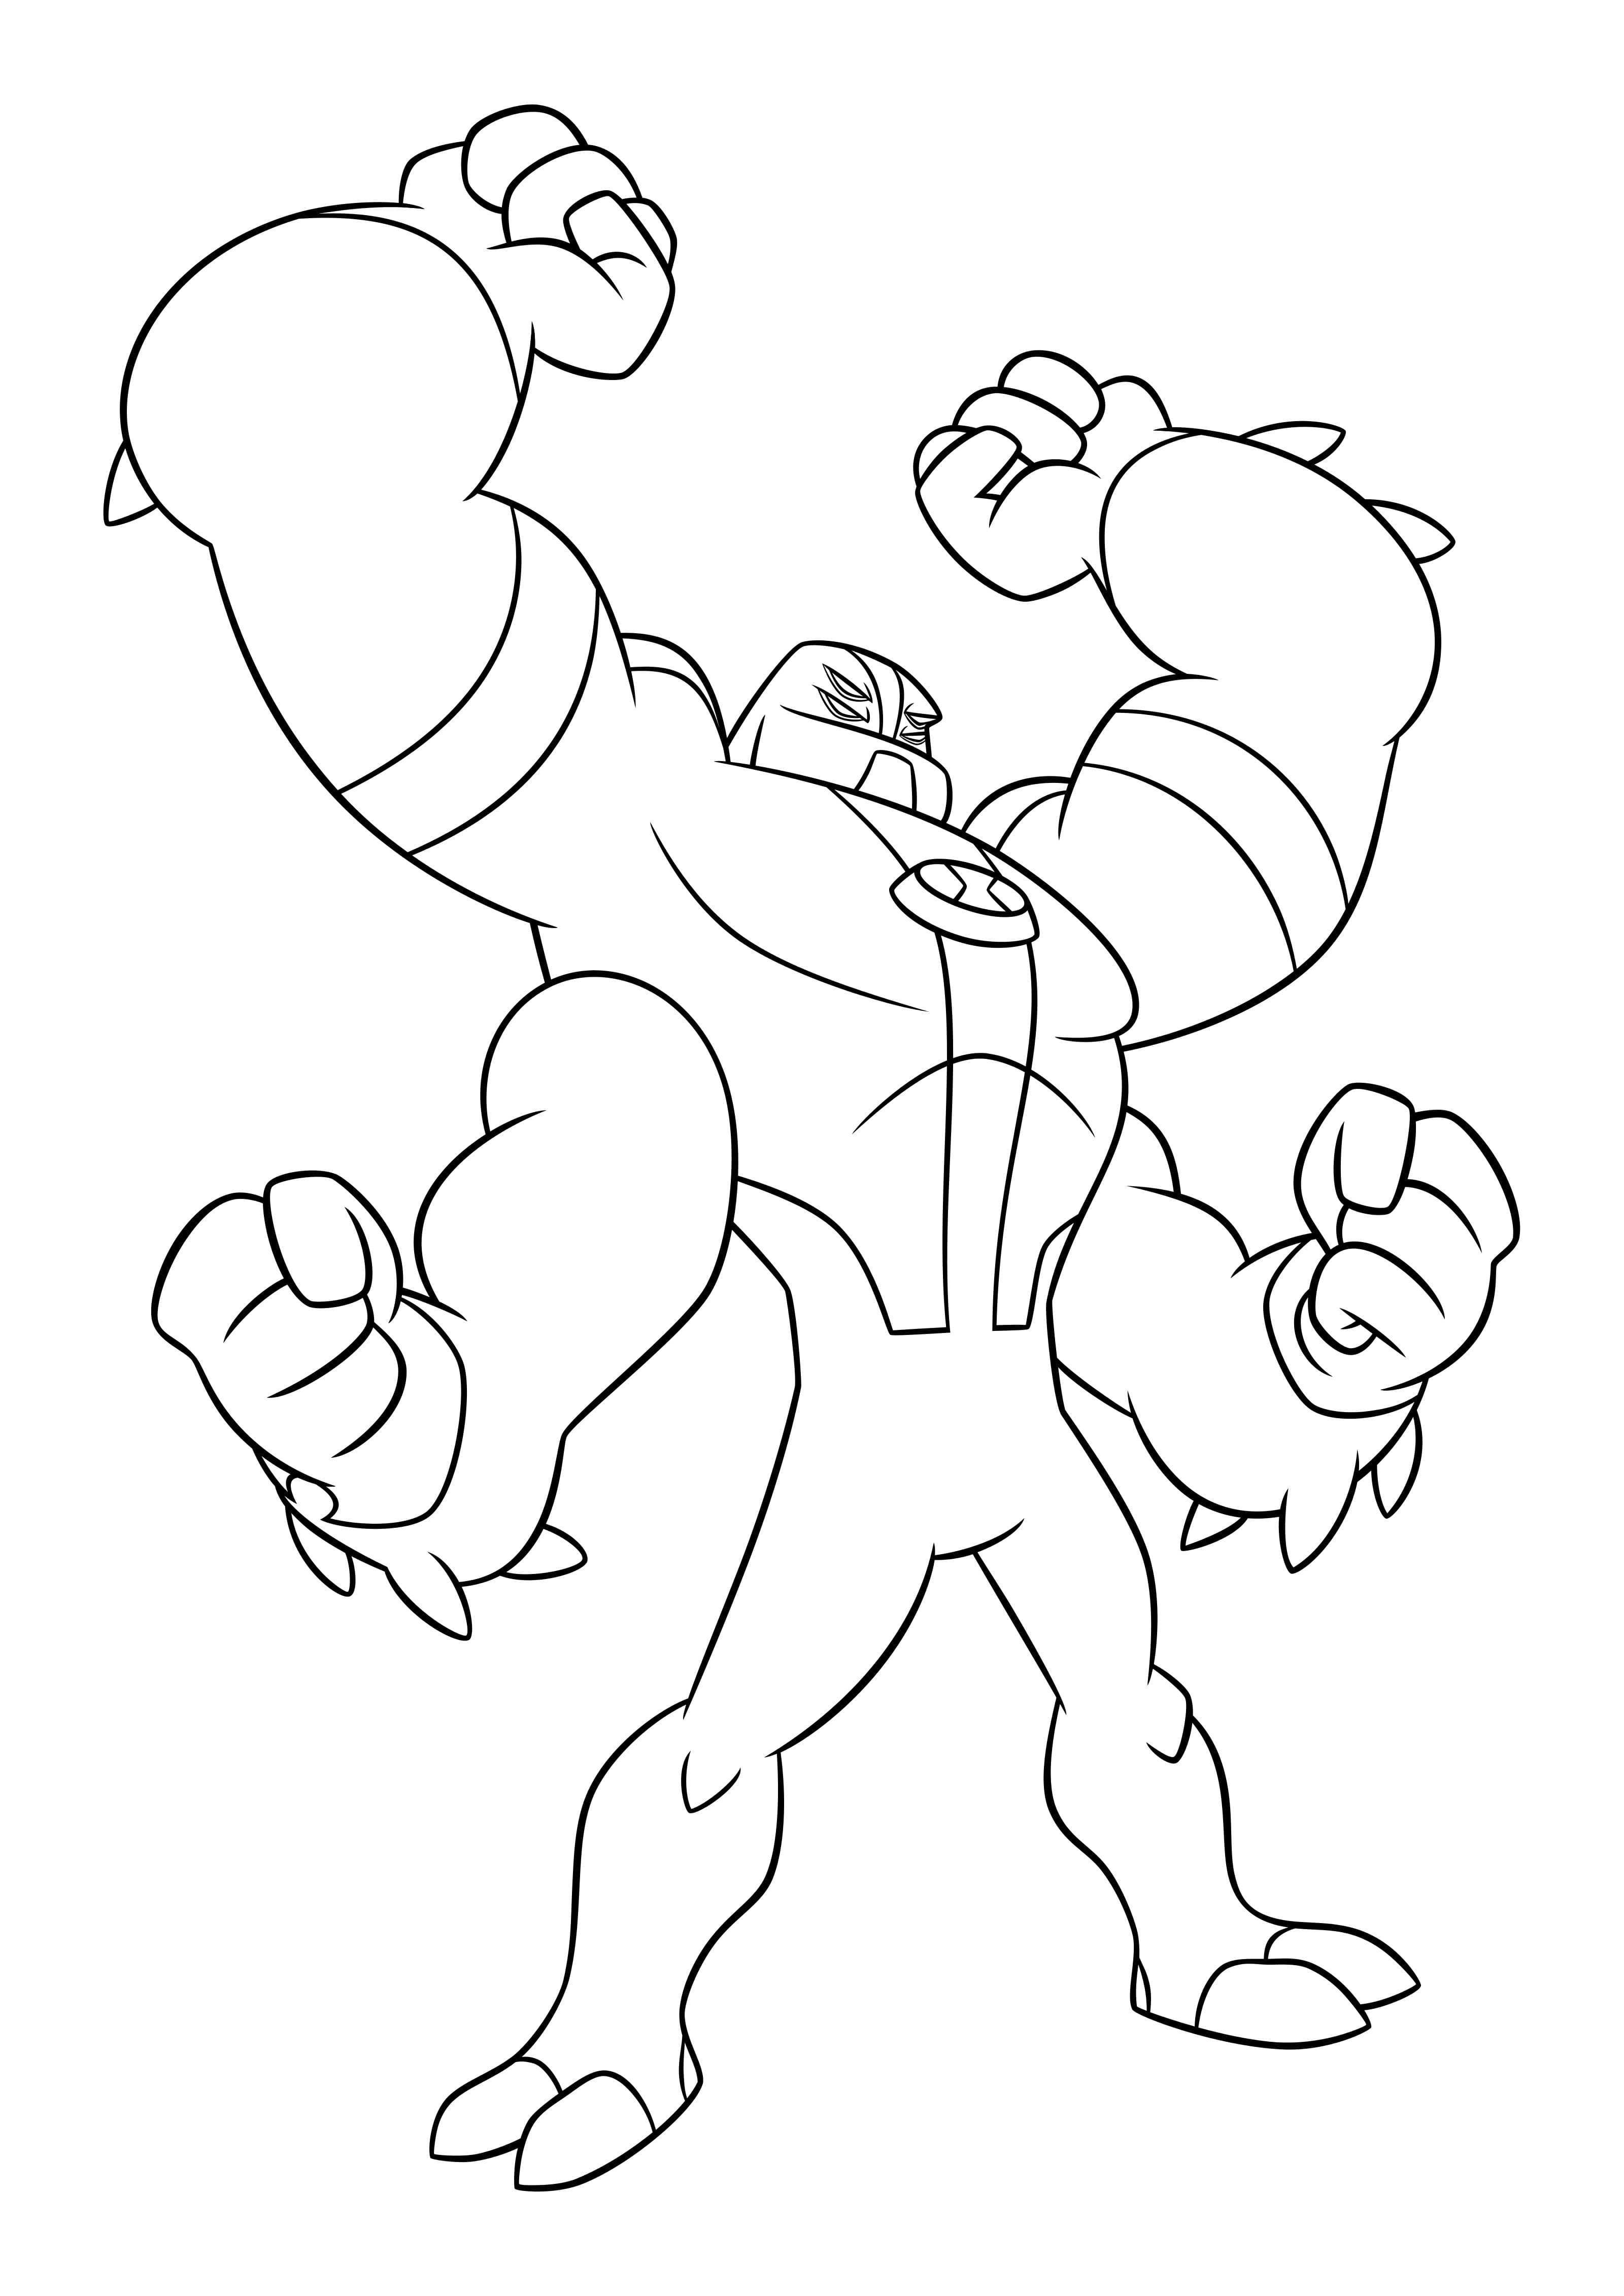 ben-10-coloring-pages-download-or-print-for-free-130-images